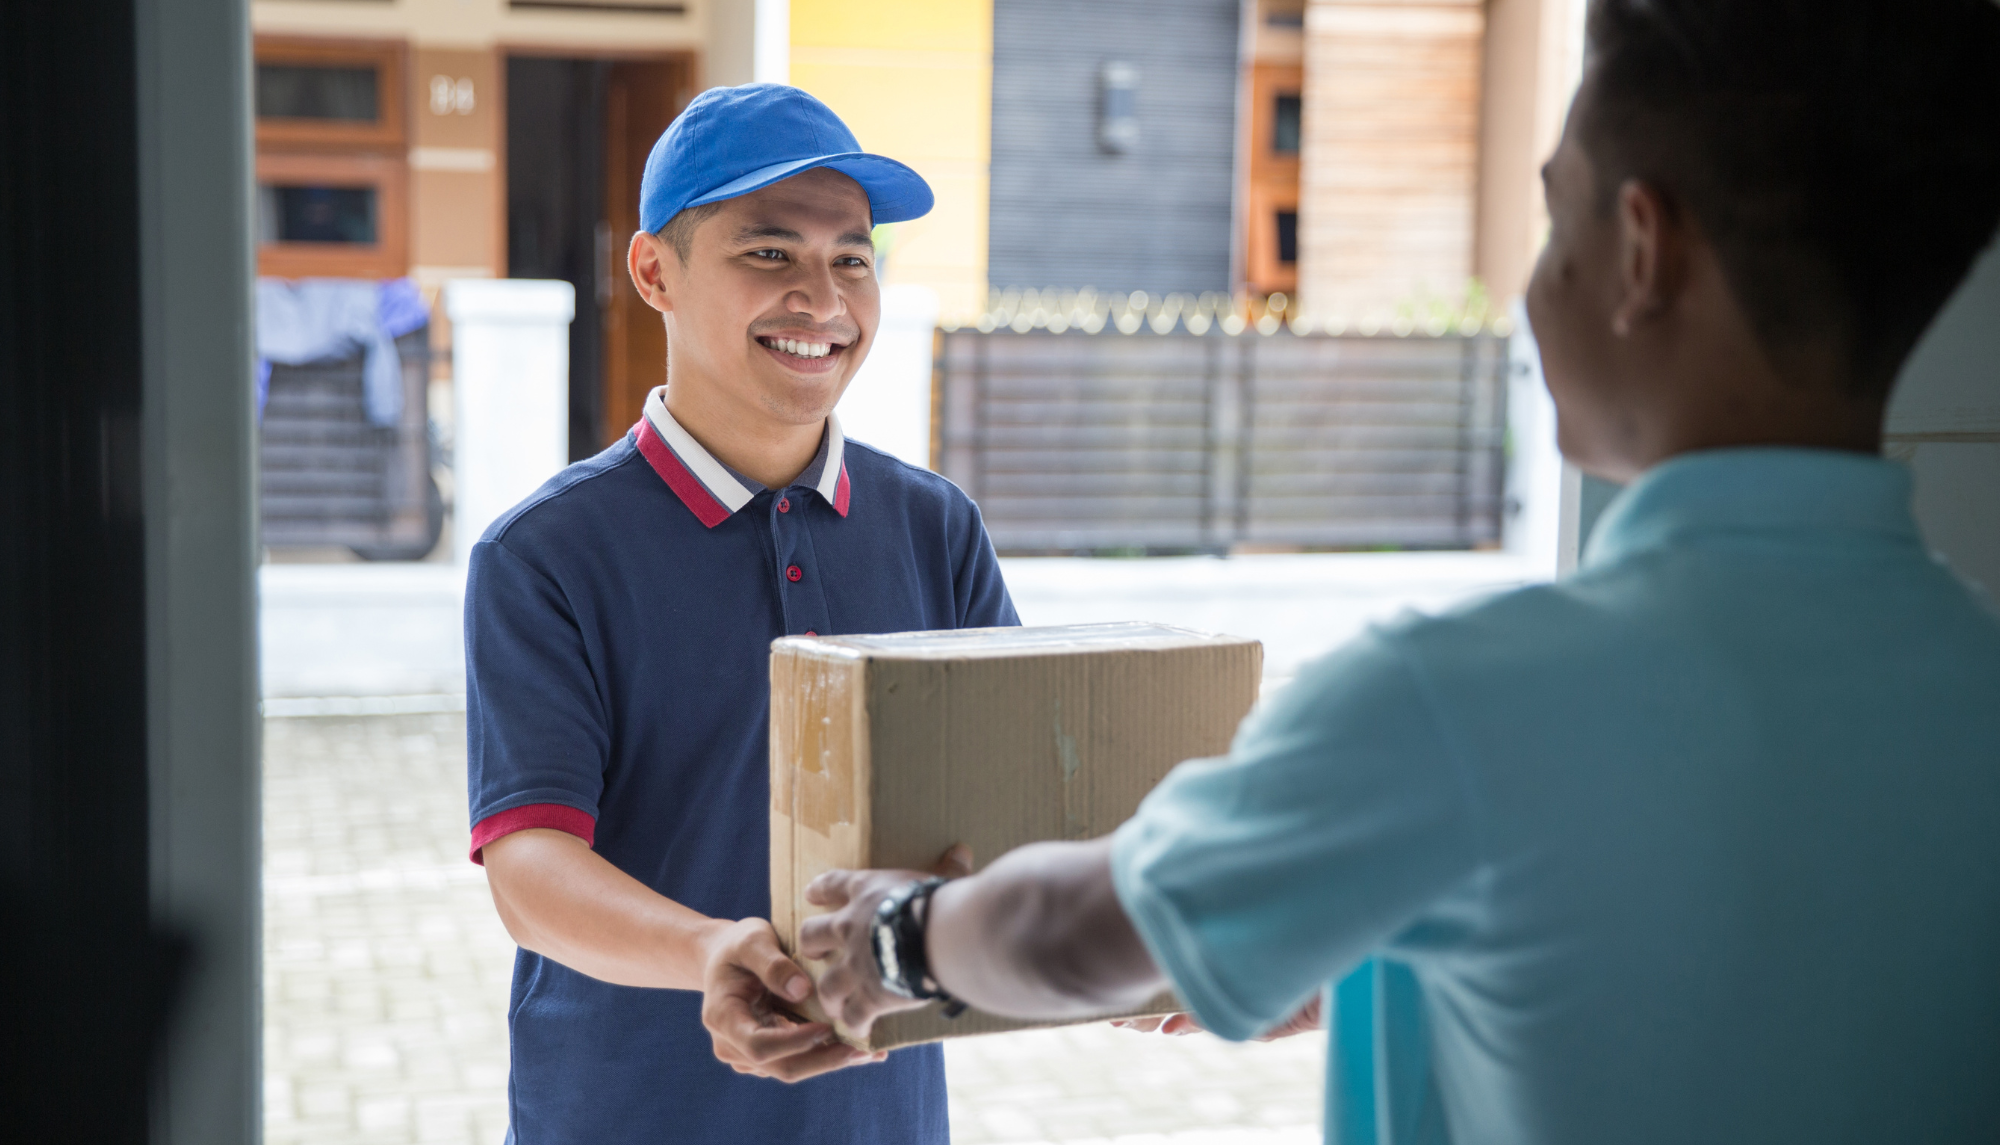 delivery guy handing a package to a guy